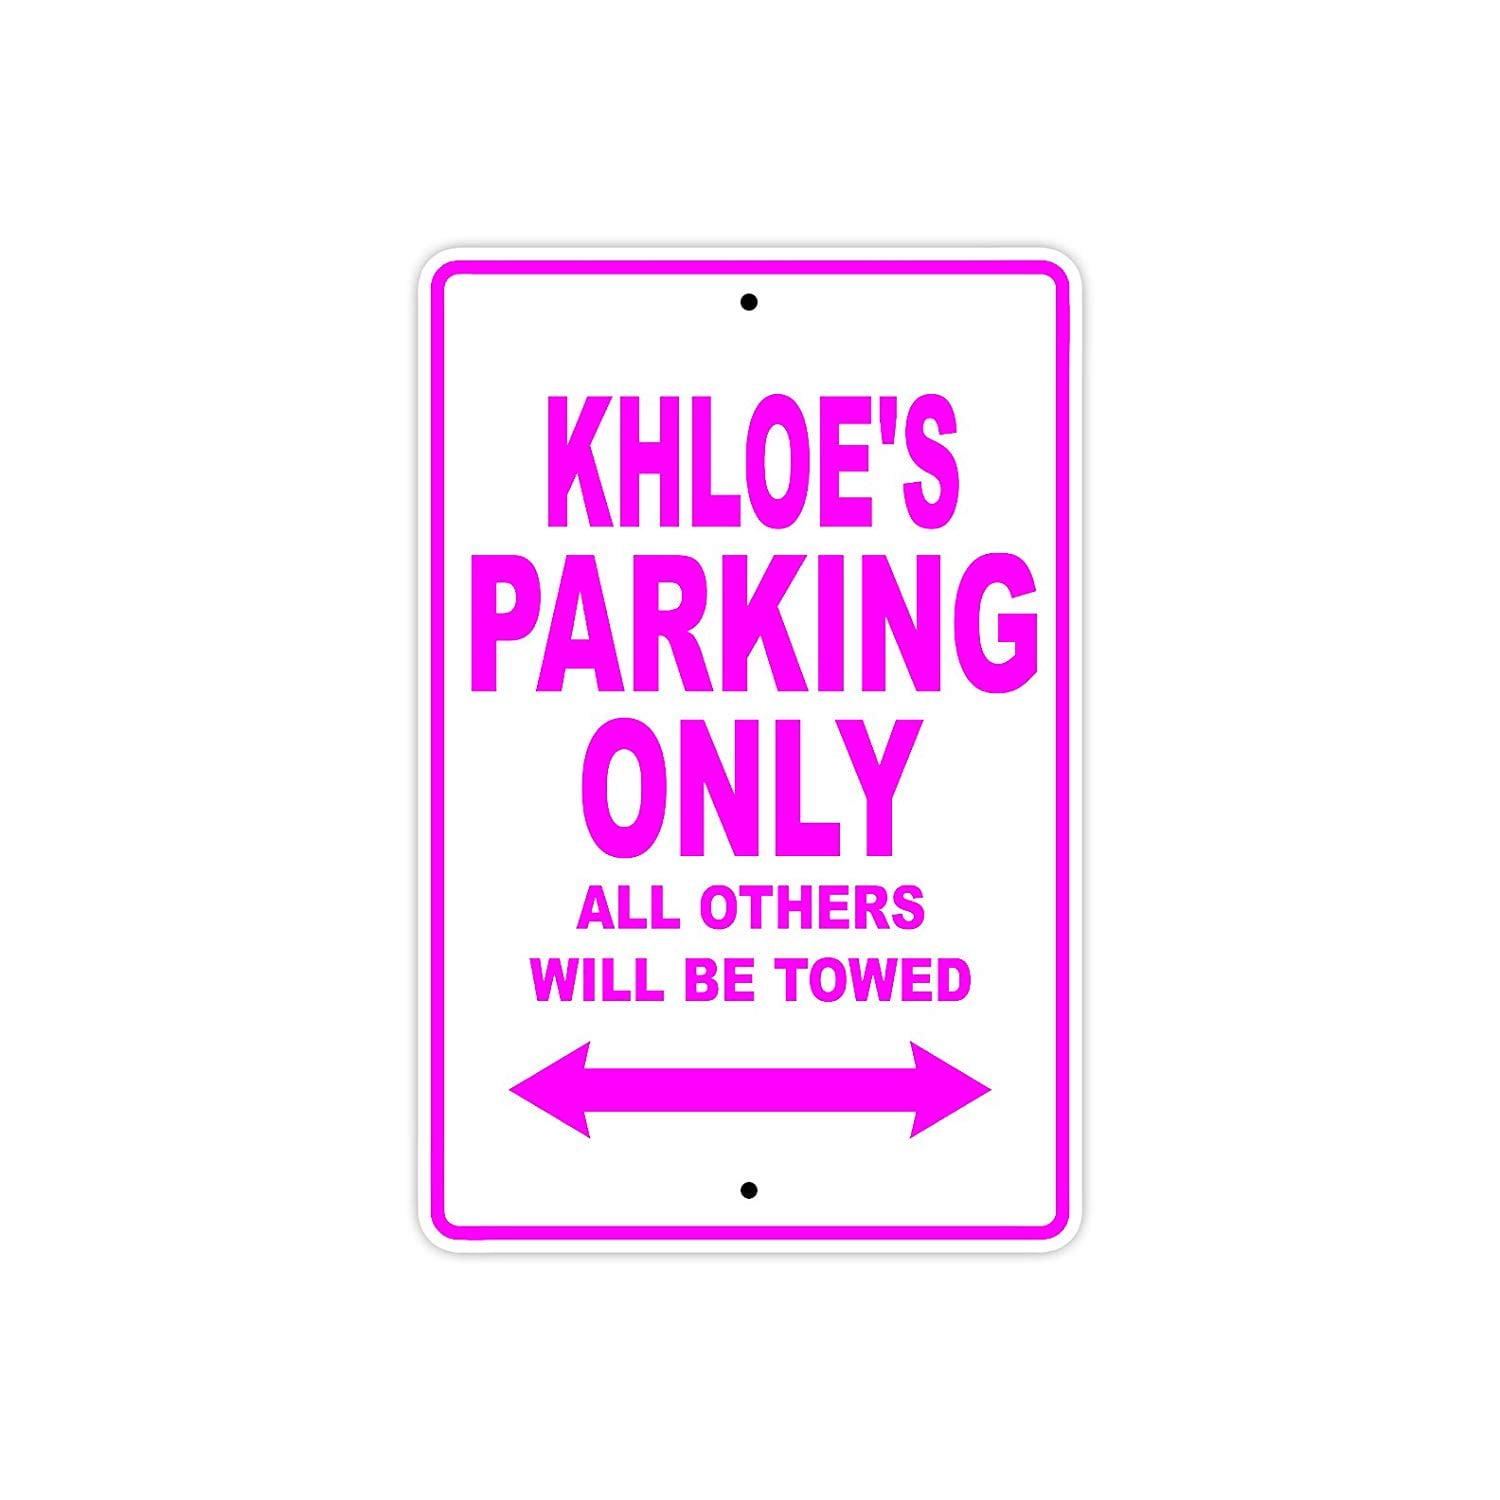 Allan's Parking Only All Others Will Be Towed Name Novelty Metal Aluminum Sign 